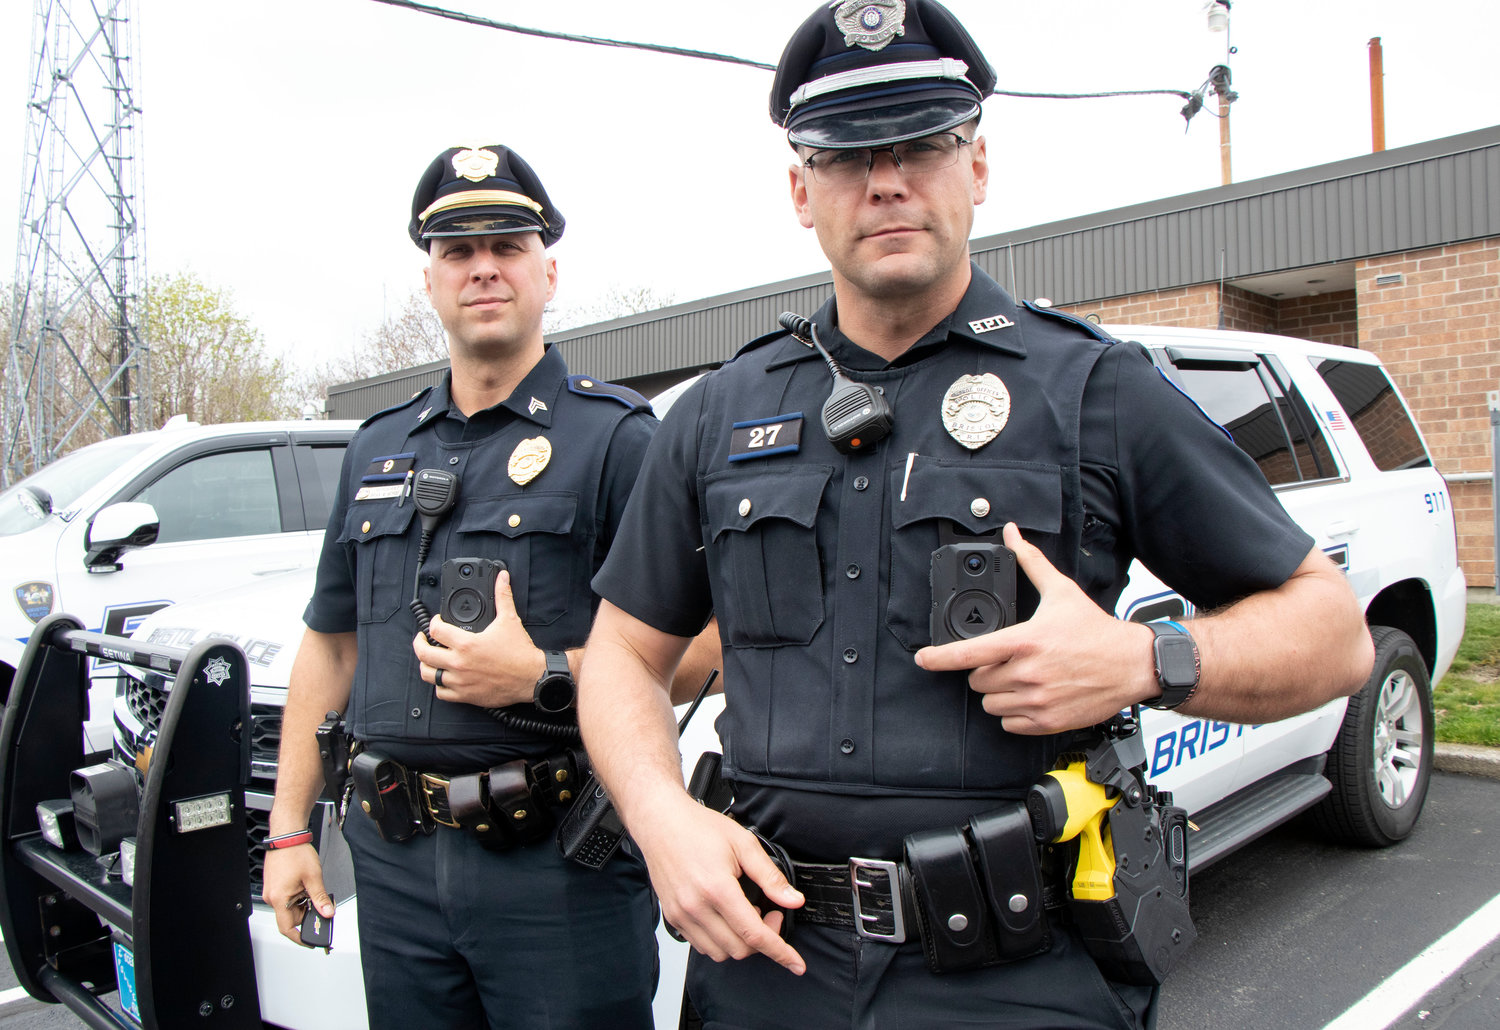 Bristol police officers demo body cameras earlier this year during a pilot program.